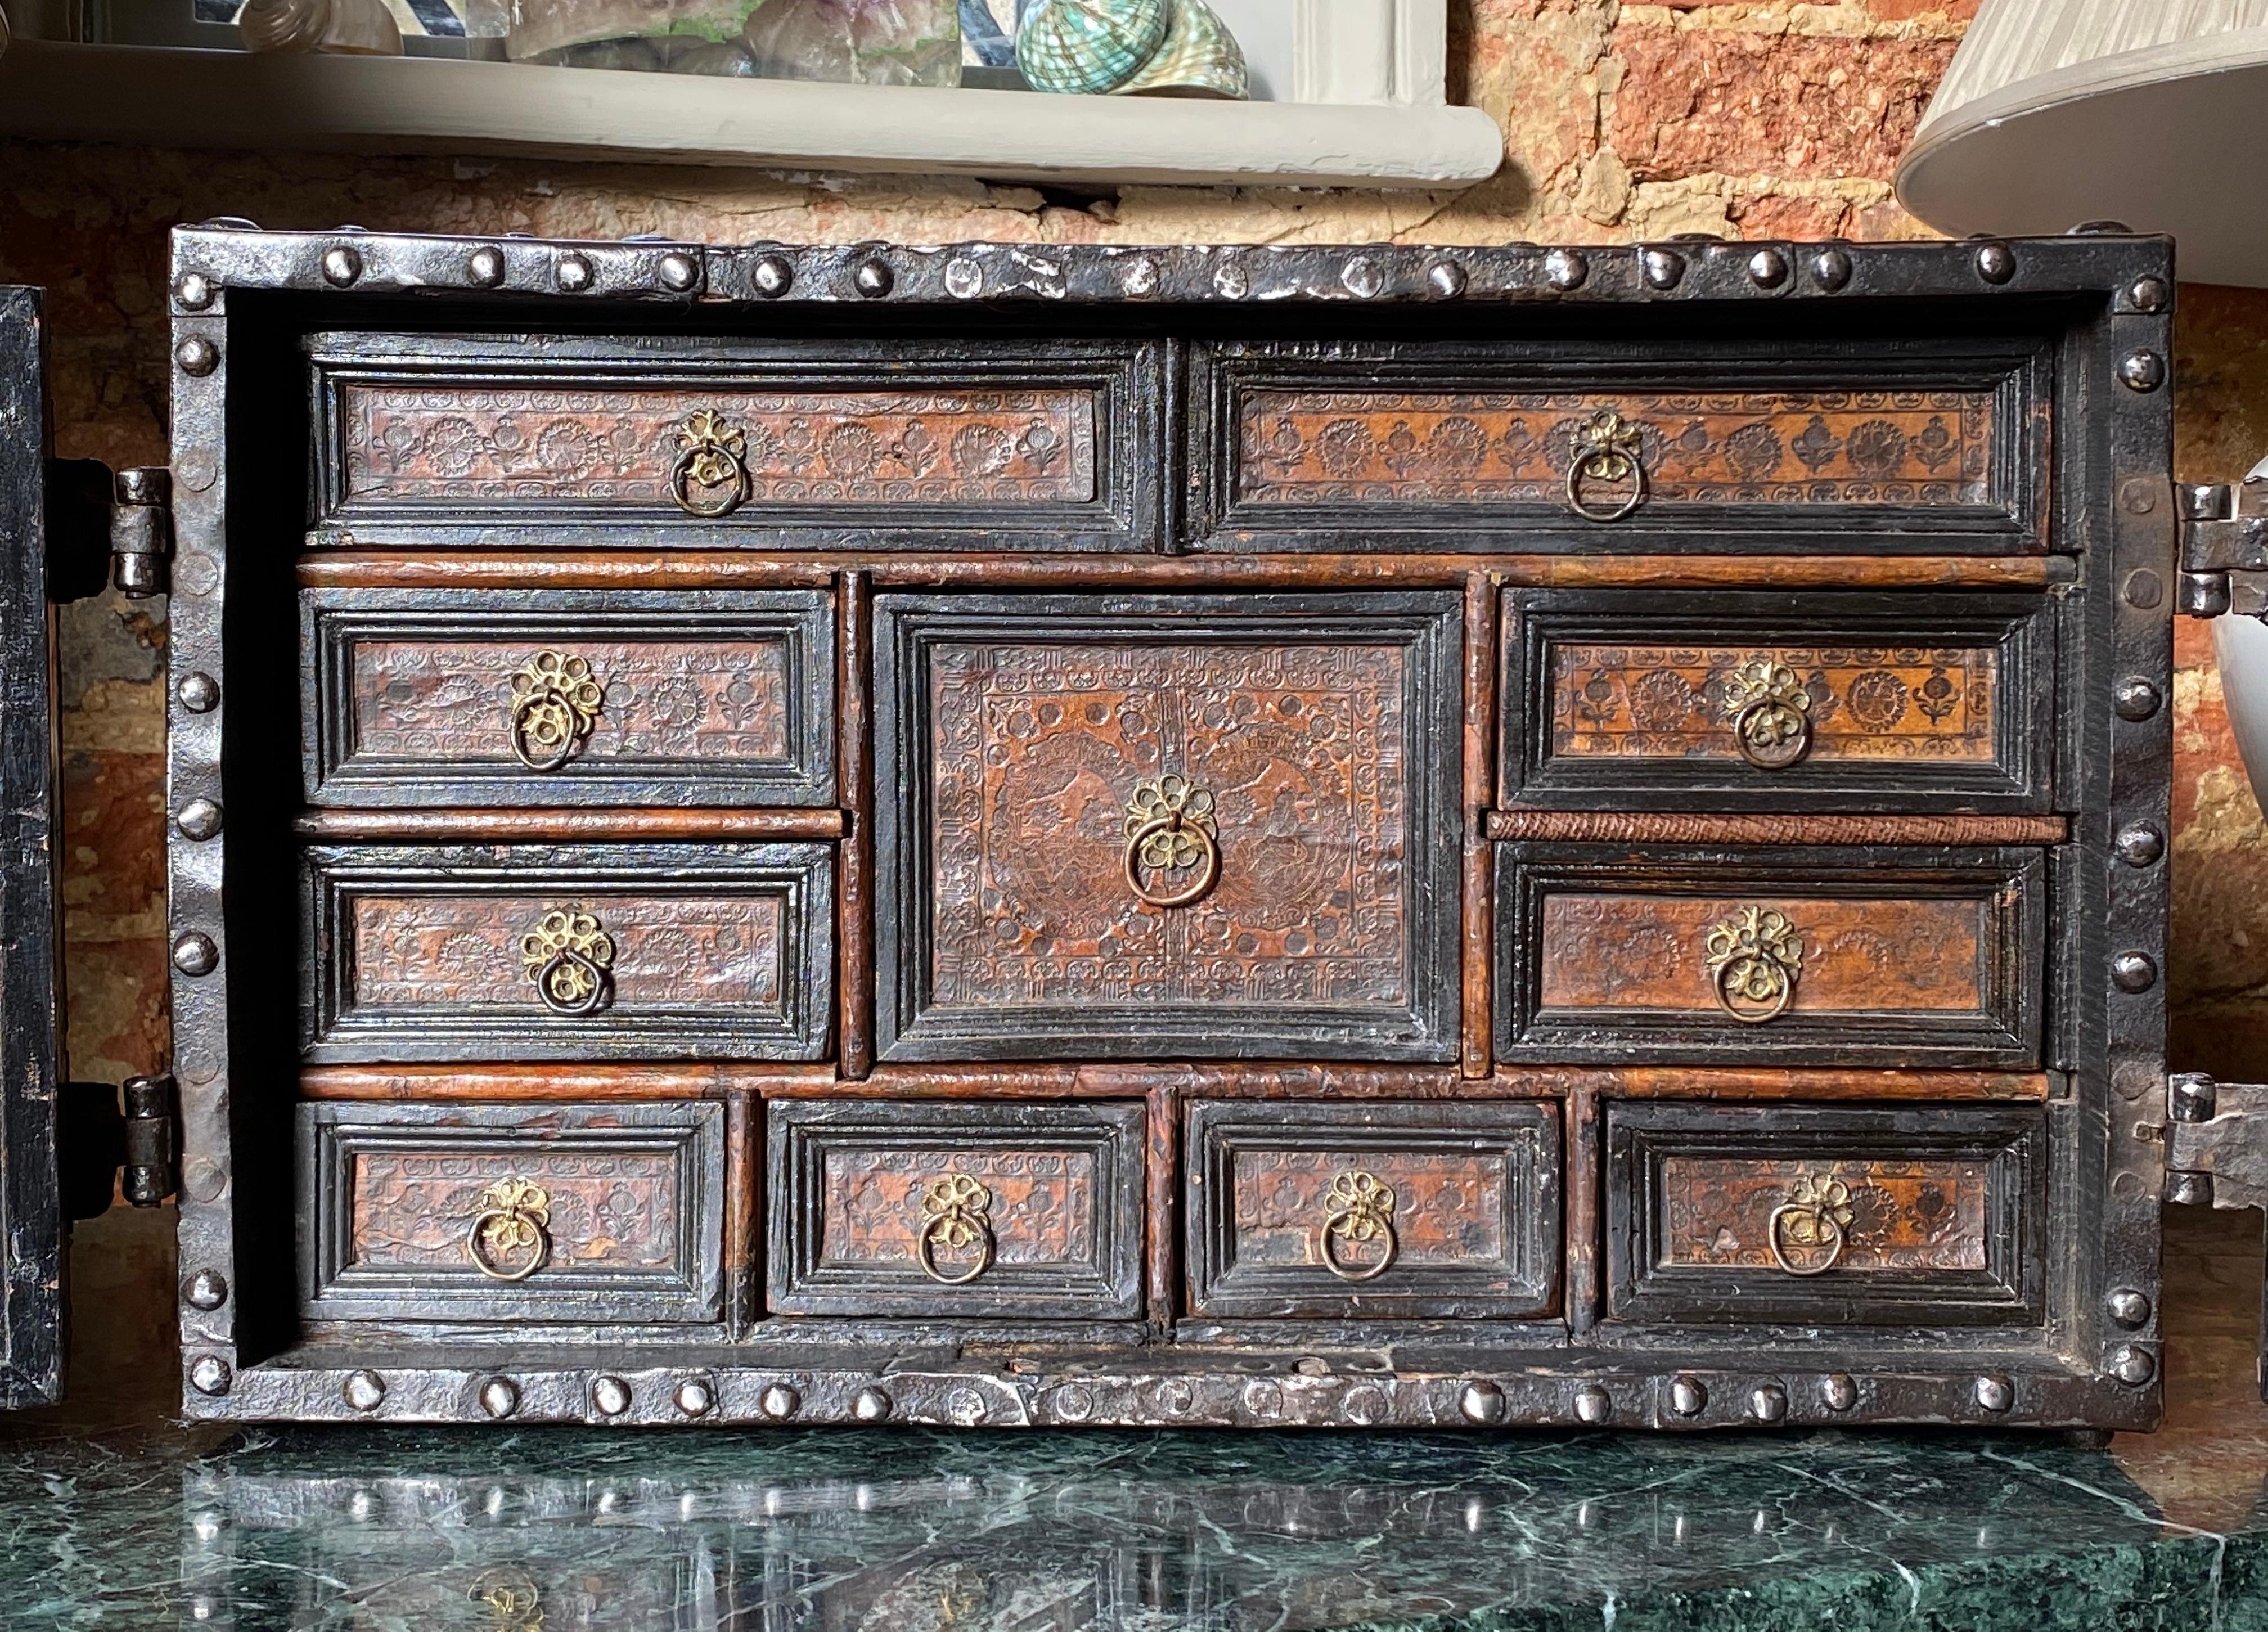 A steel-mounted strong box table cabinet, circa 1600.
Continental, probably French.

An ornately engraved antique steel-bound rectangular strong box, with front opening doors revealing numerous fitted drawers, concealing two secret compartments.